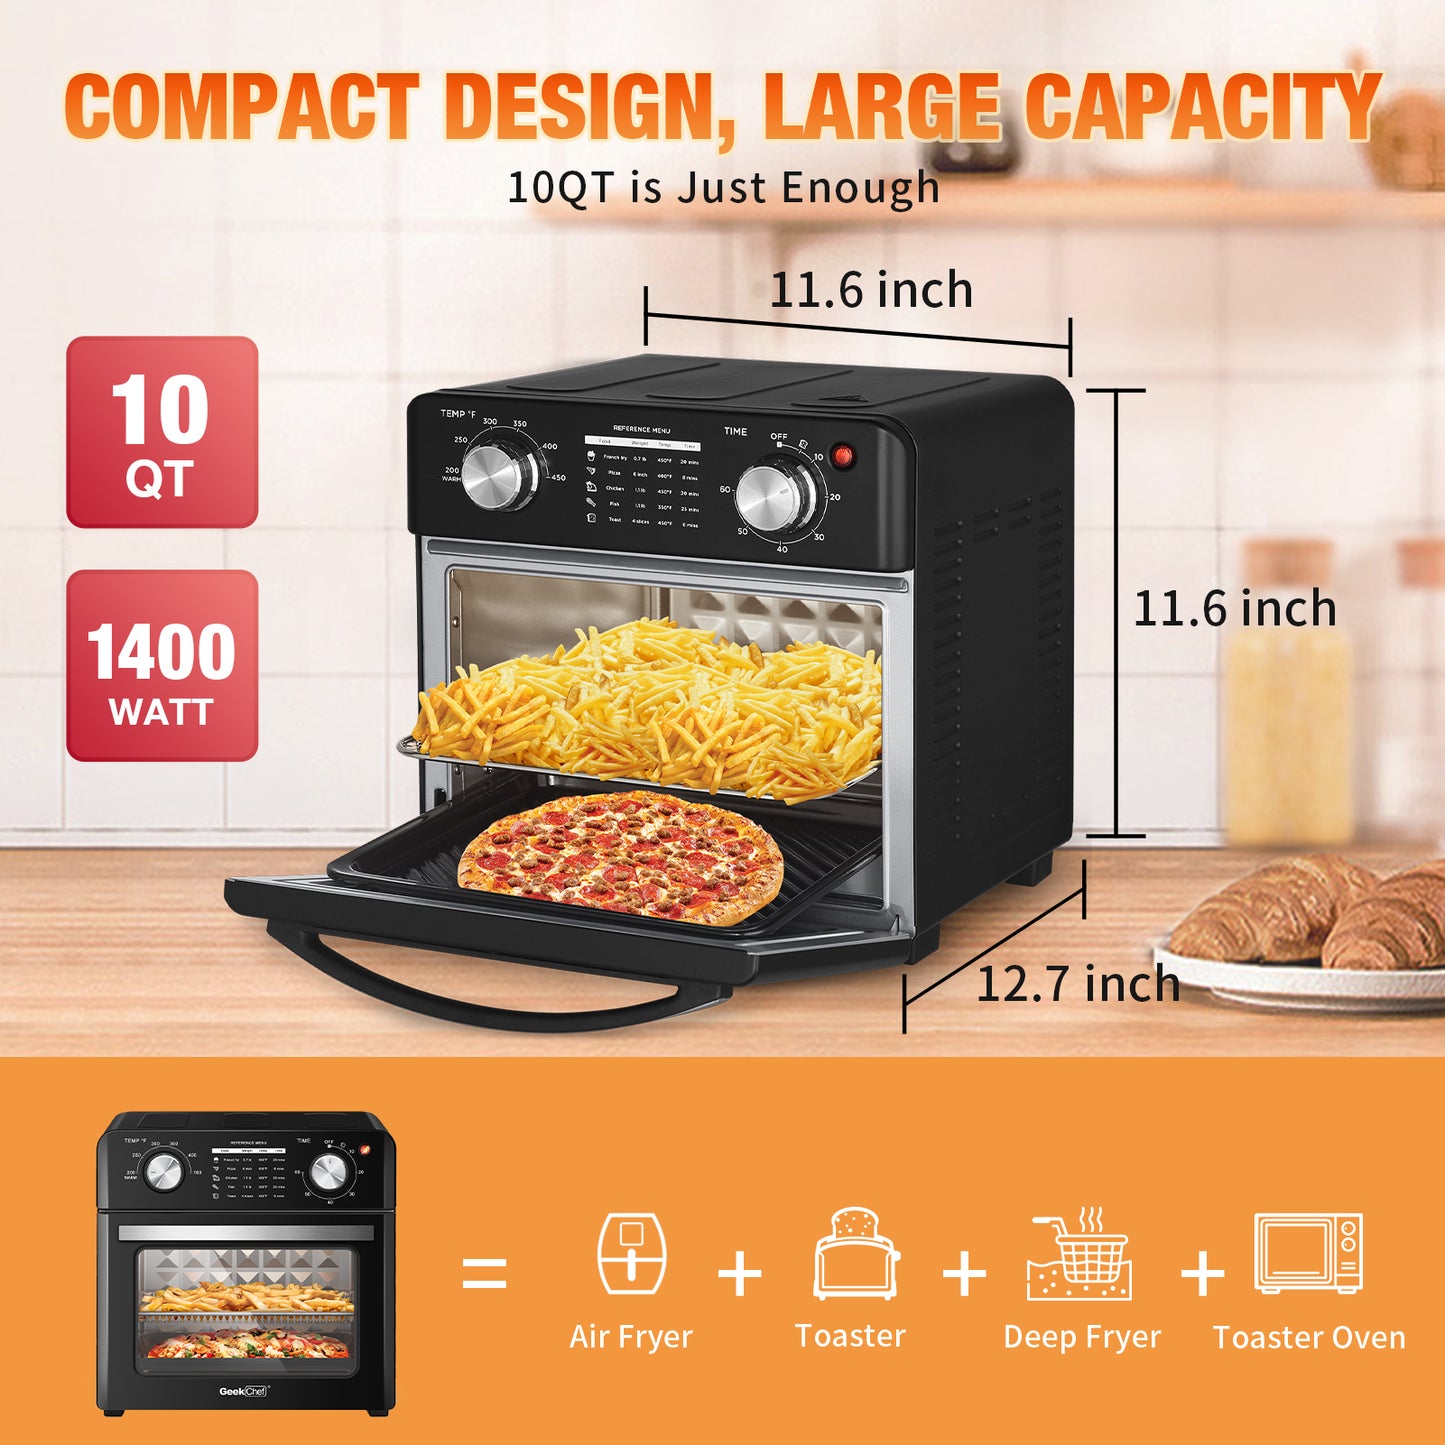 Geek Chef Air Fryer 10QT, Countertop Toaster Oven, 4 Slice Toaster Air Fryer Oven Warm, Broil, Toast, Bake, Air Fry, Oil-Free, Black, Perfect for Countertop